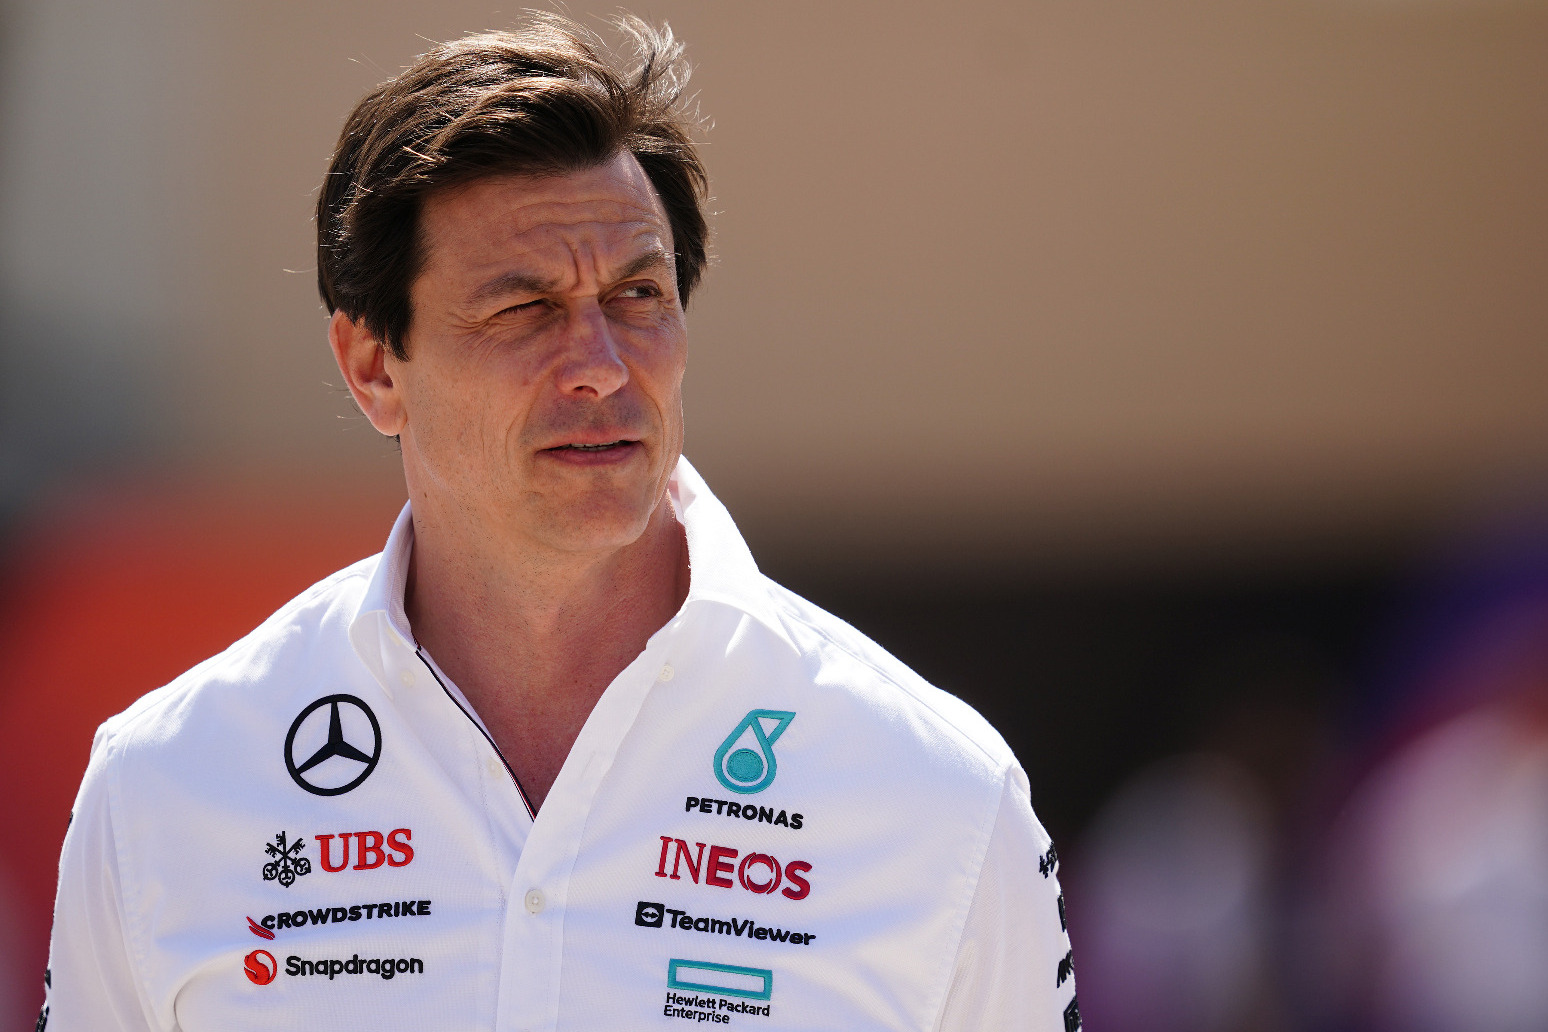 Toto Wolff joins Mercedes in Japan after recent struggles 